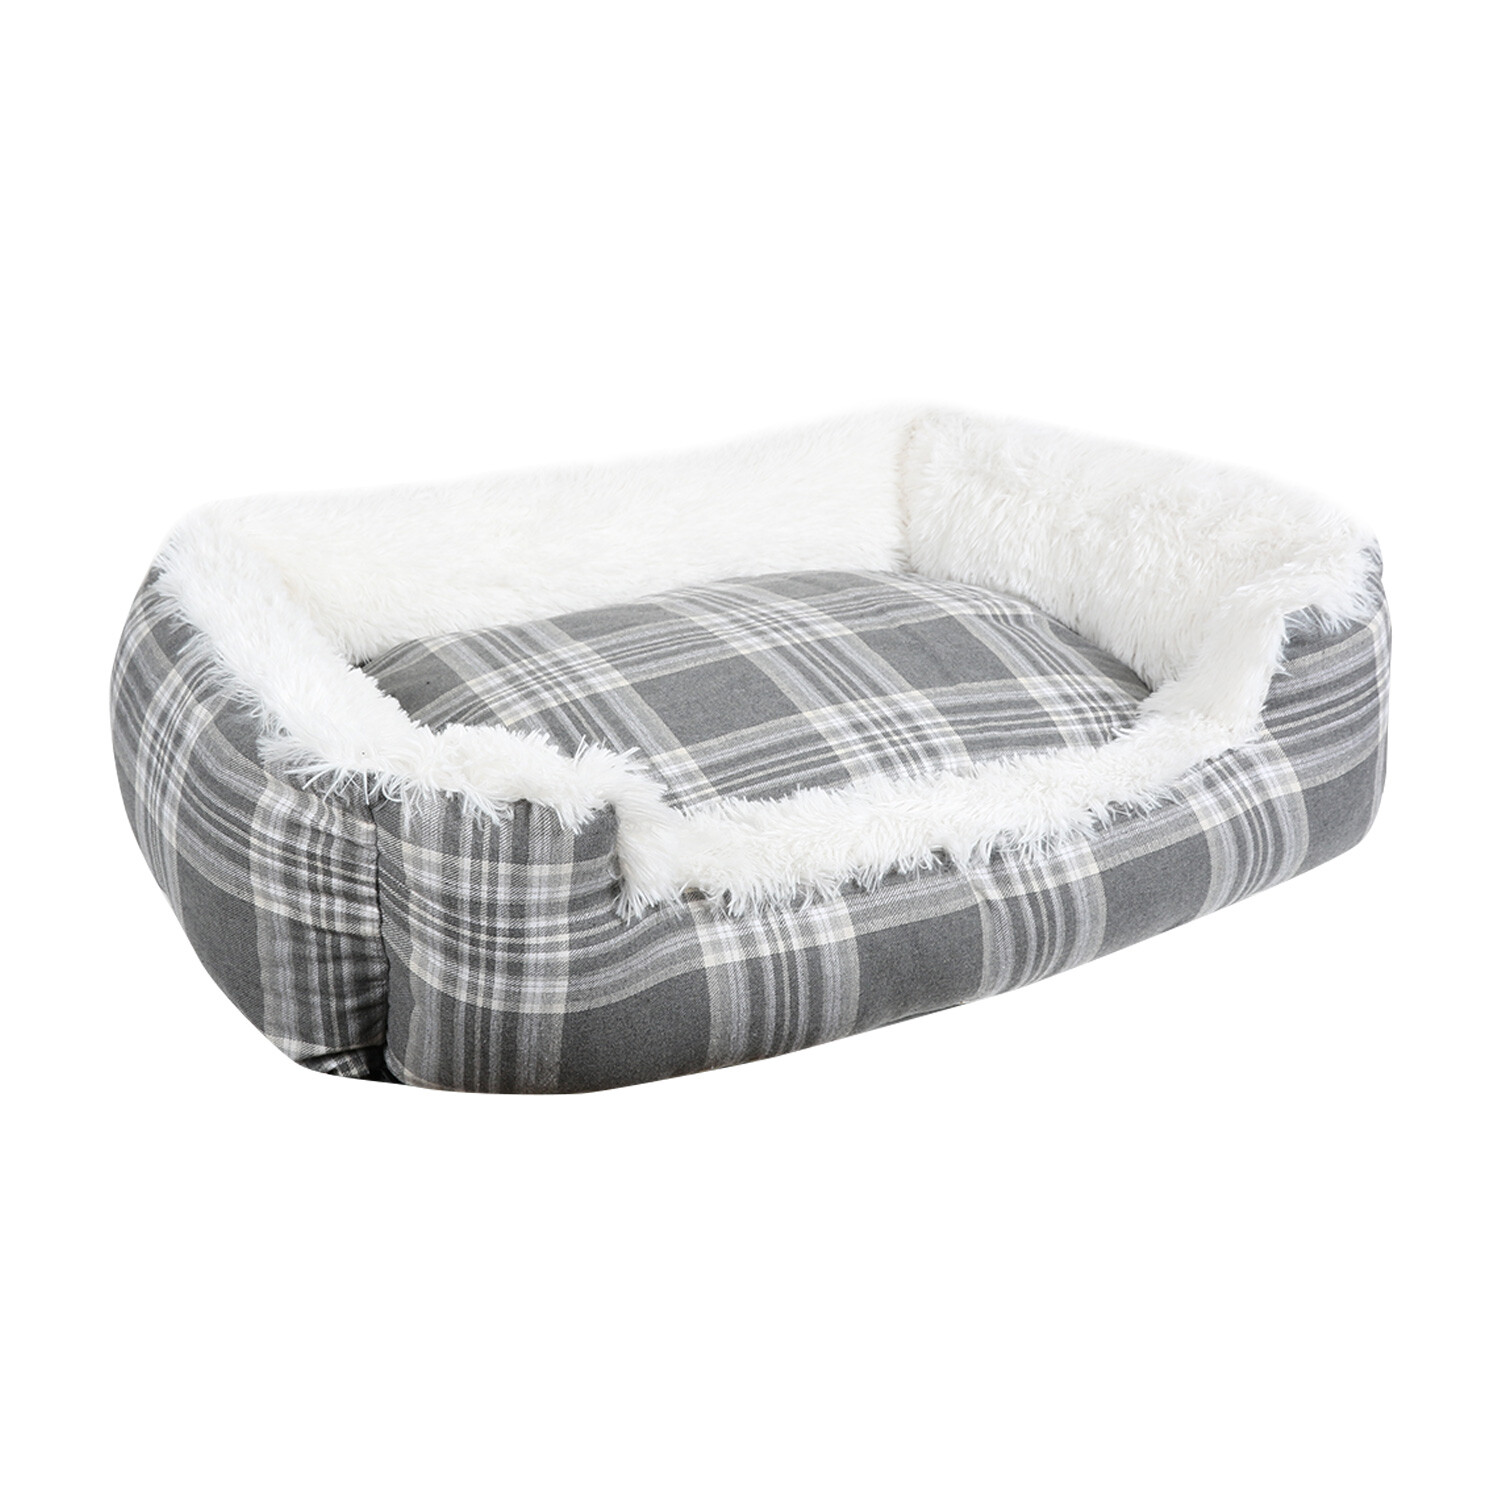 Clever Paws Small Grey Super Fluffy Check Pet Bed Image 2